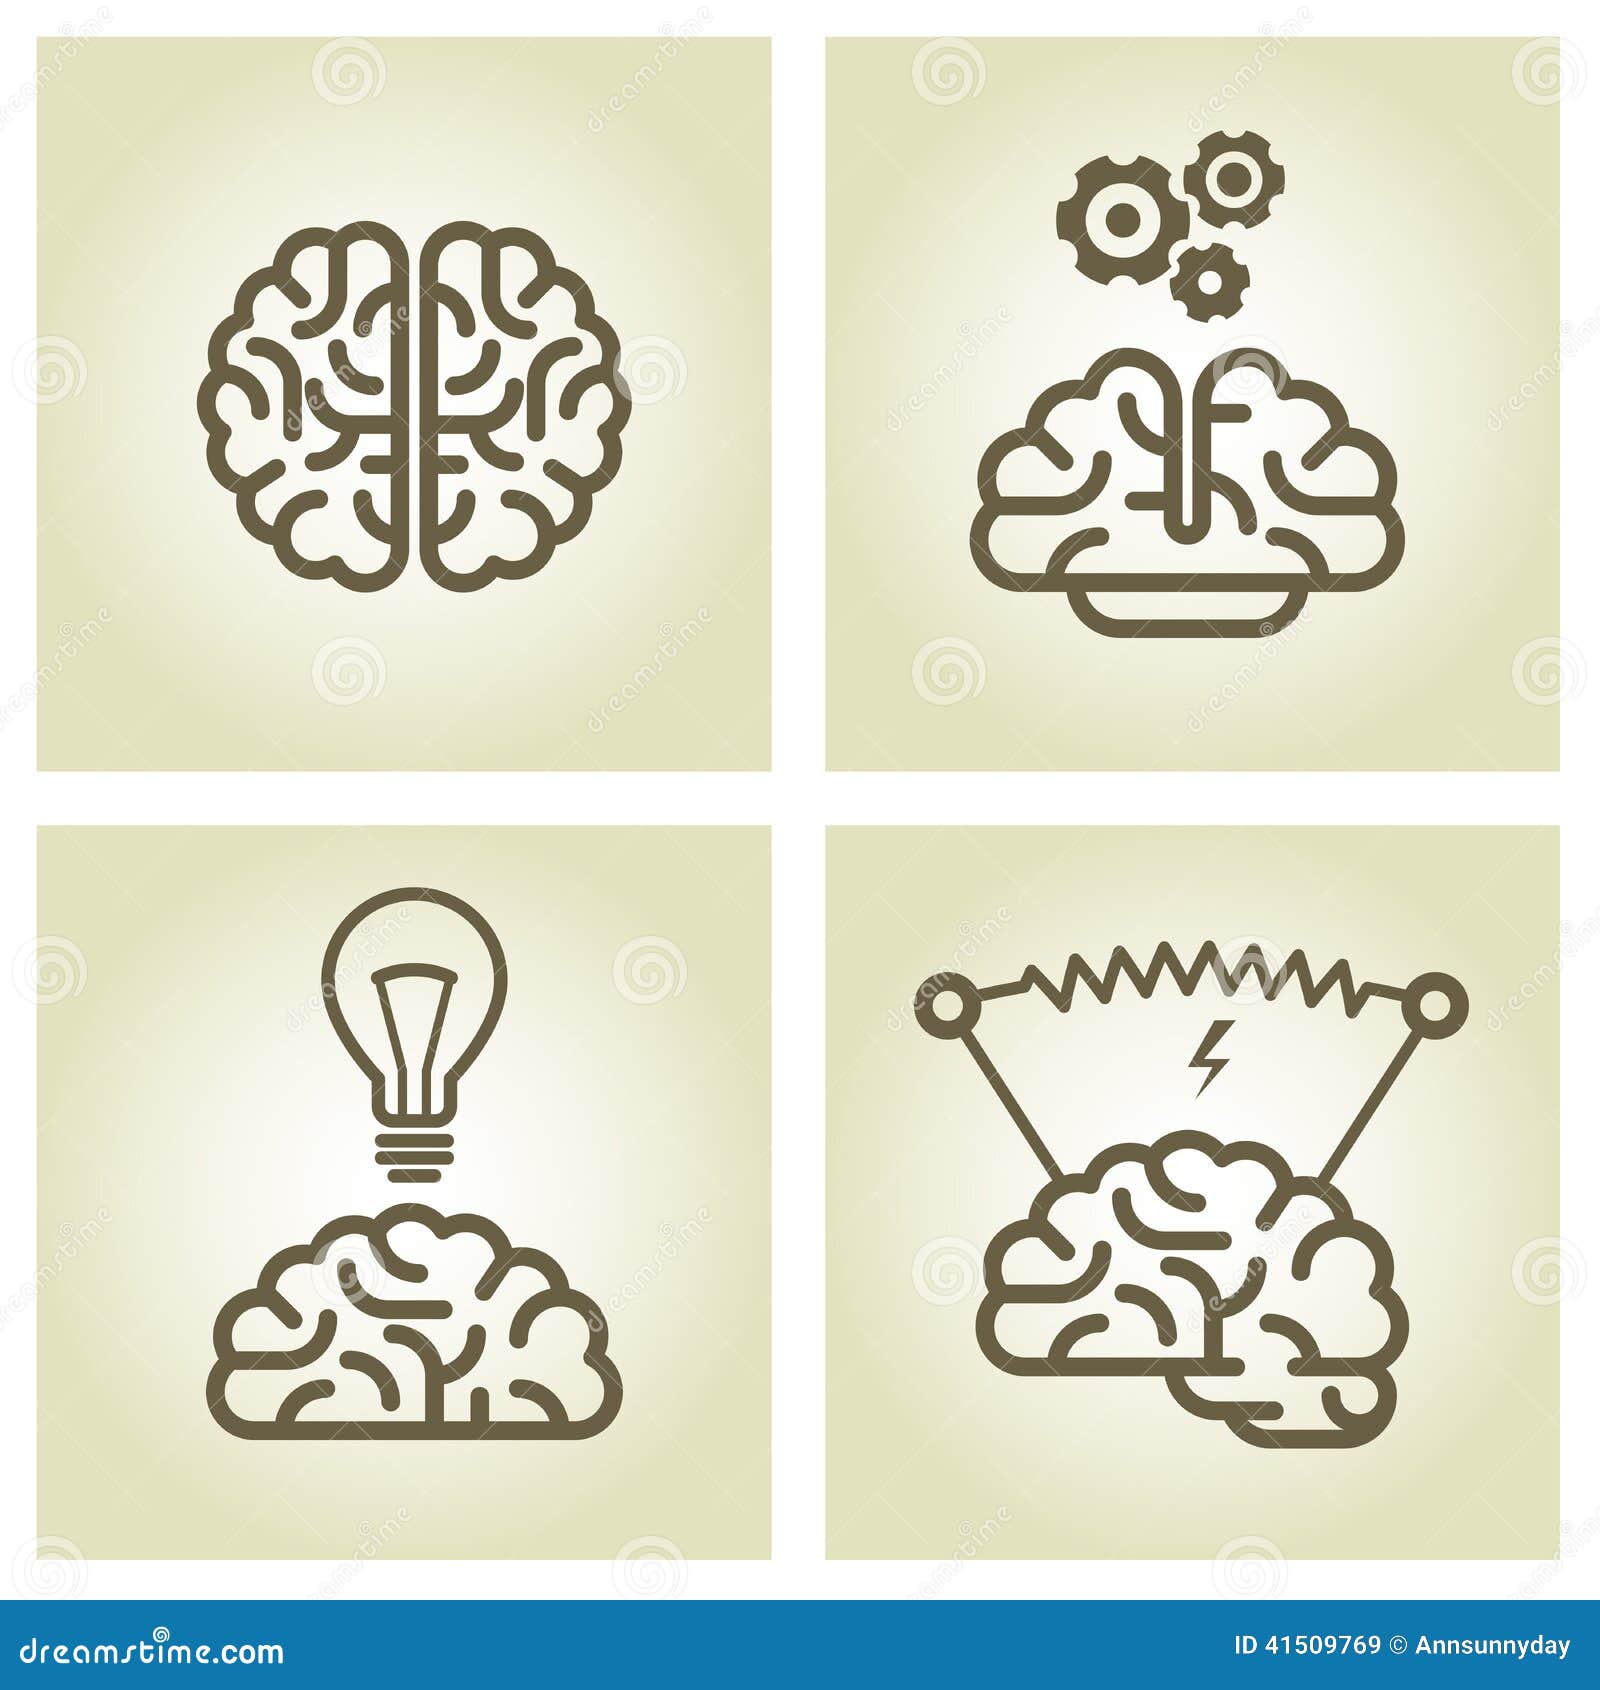 brain icon - invention and inspiration s